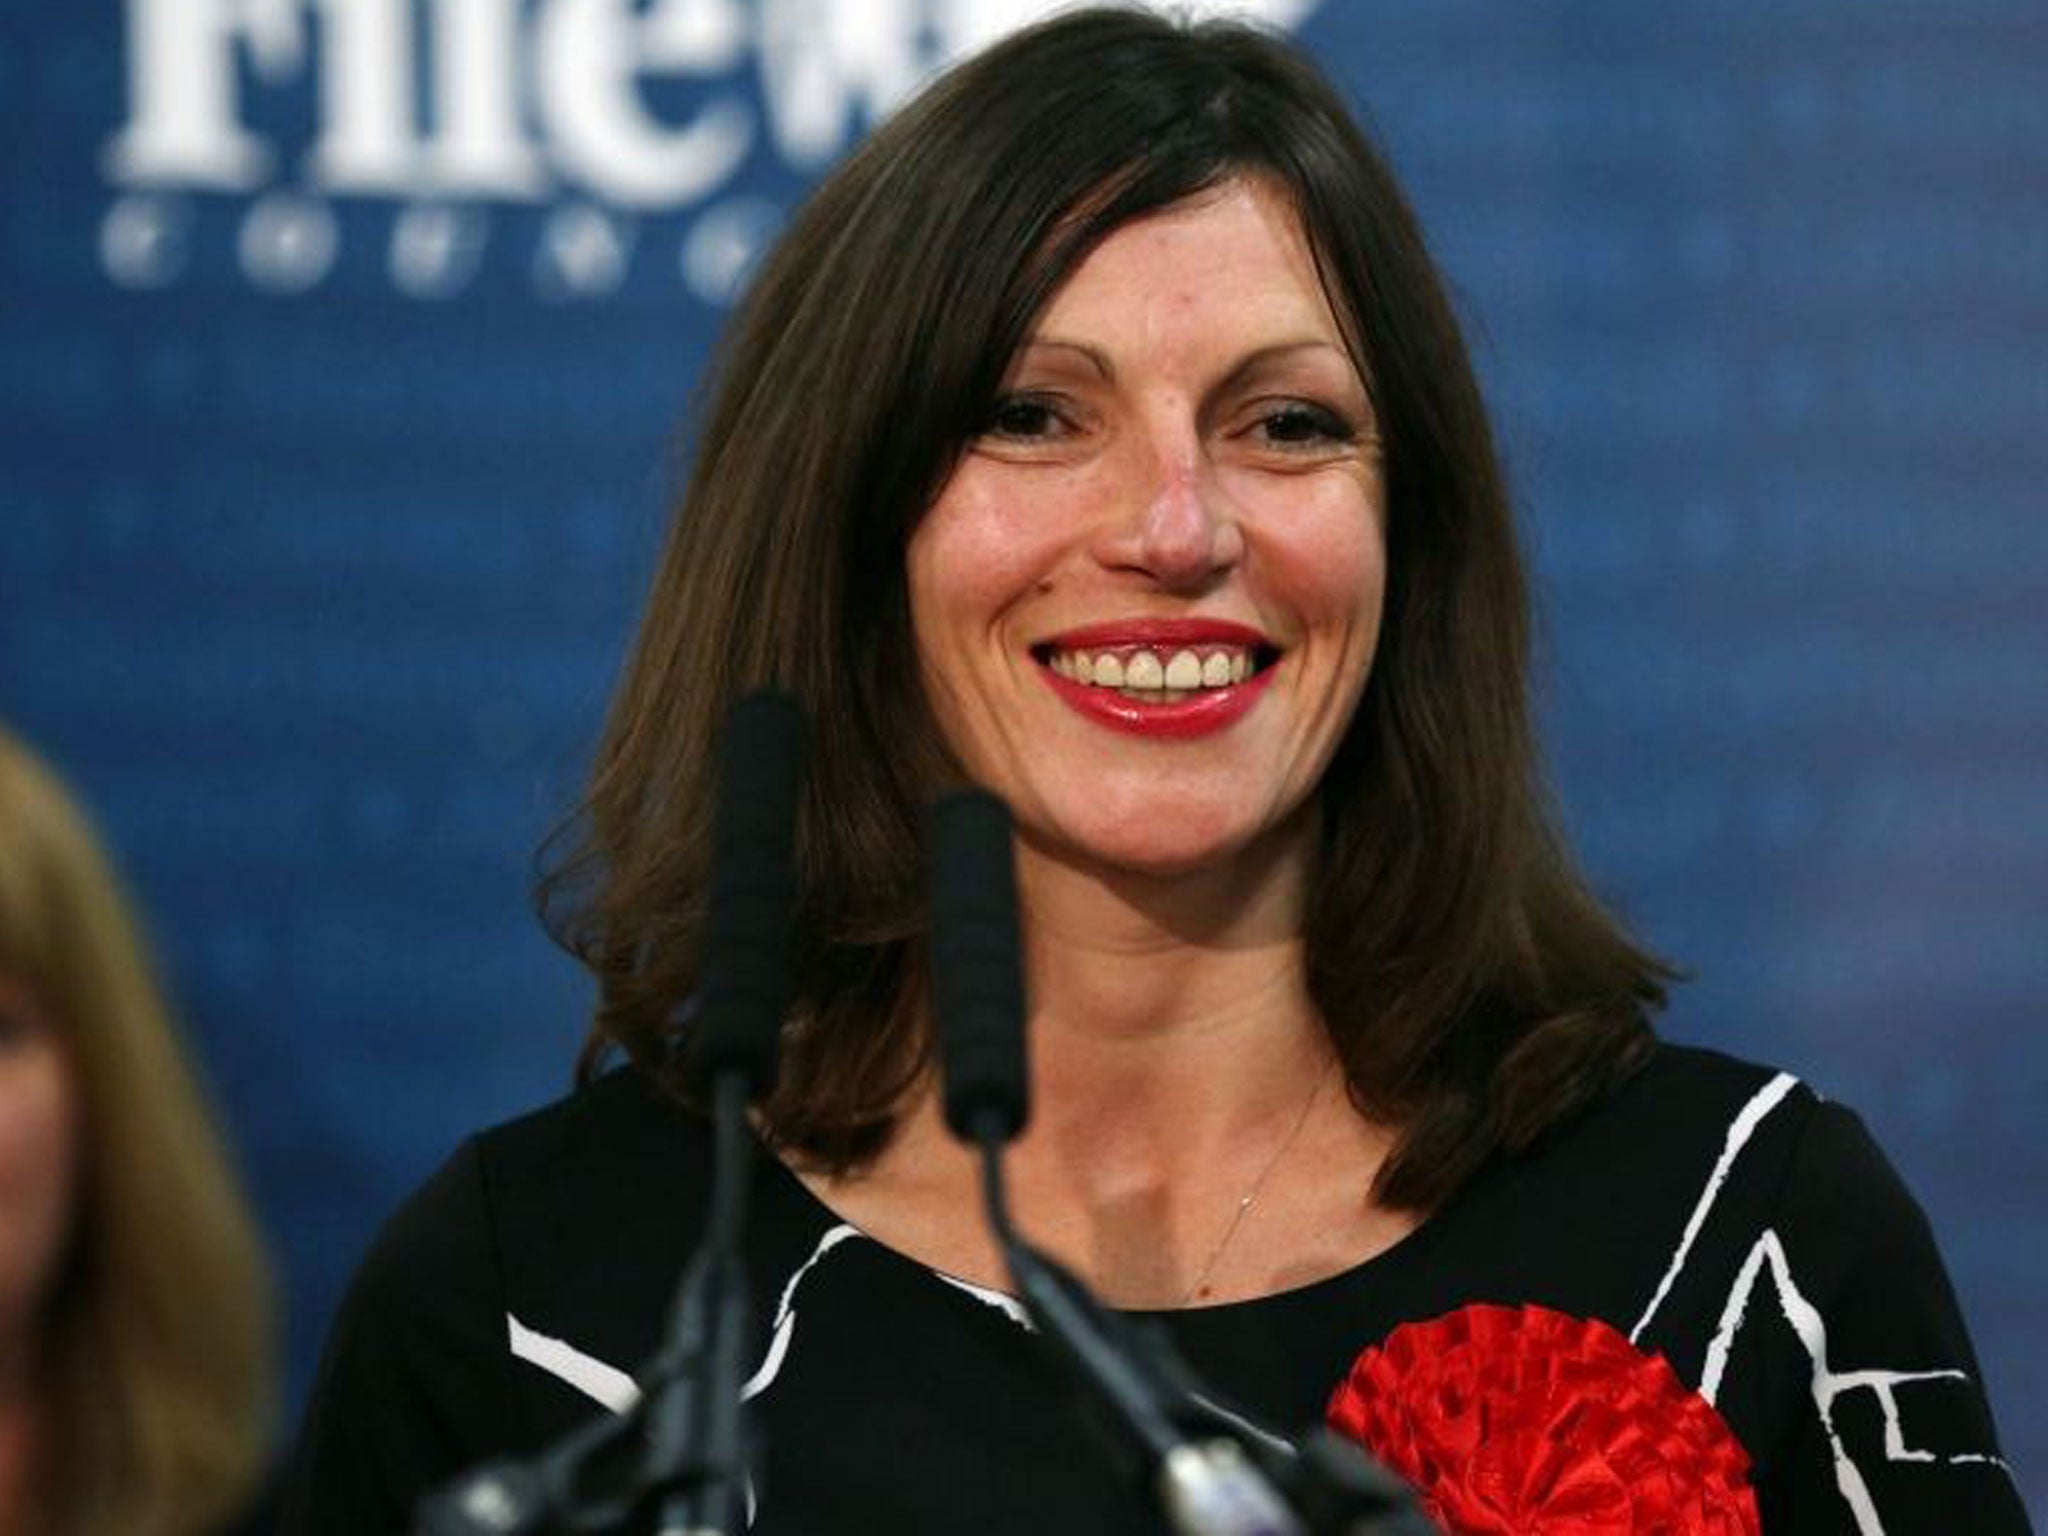 Labours Cara Hilton celebrates after winning the election count for the Dunfirmline by-election at the Pitreavie Athletics Centre, Dunfirmline.